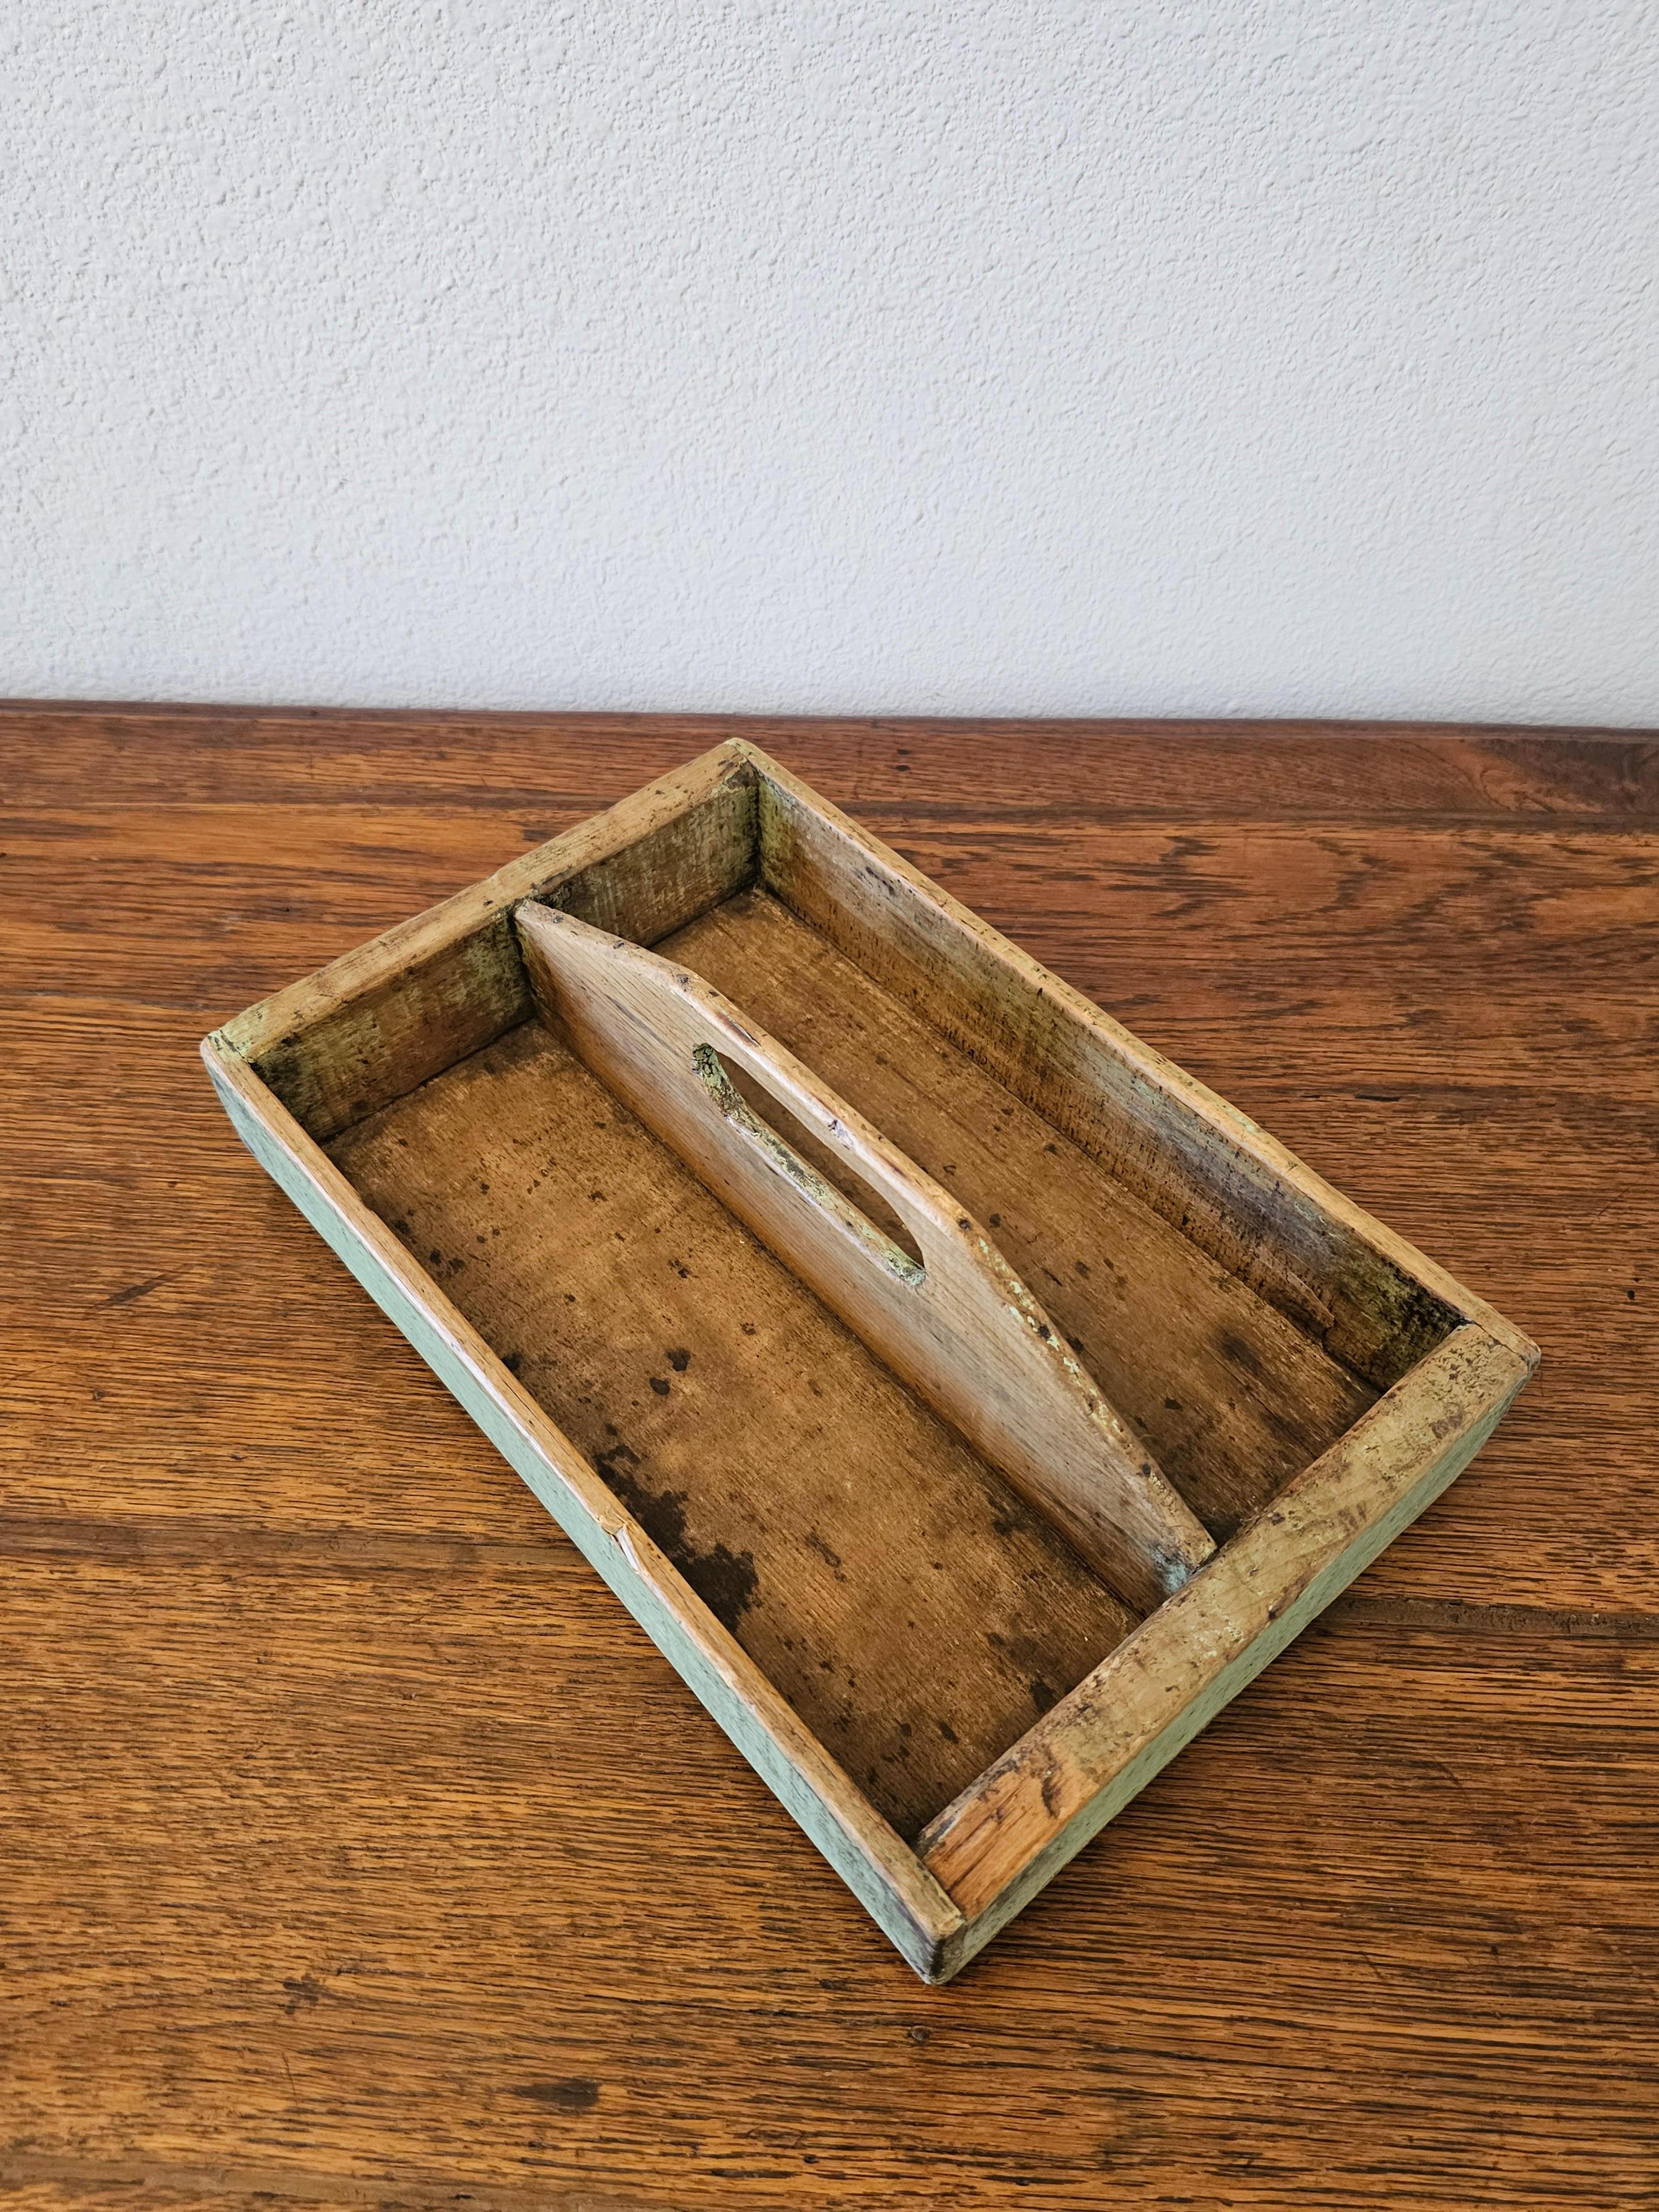 Primitive Antique Painted Wooden Cutlery Caddy Decorative Tray In Good Condition For Sale In Forney, TX